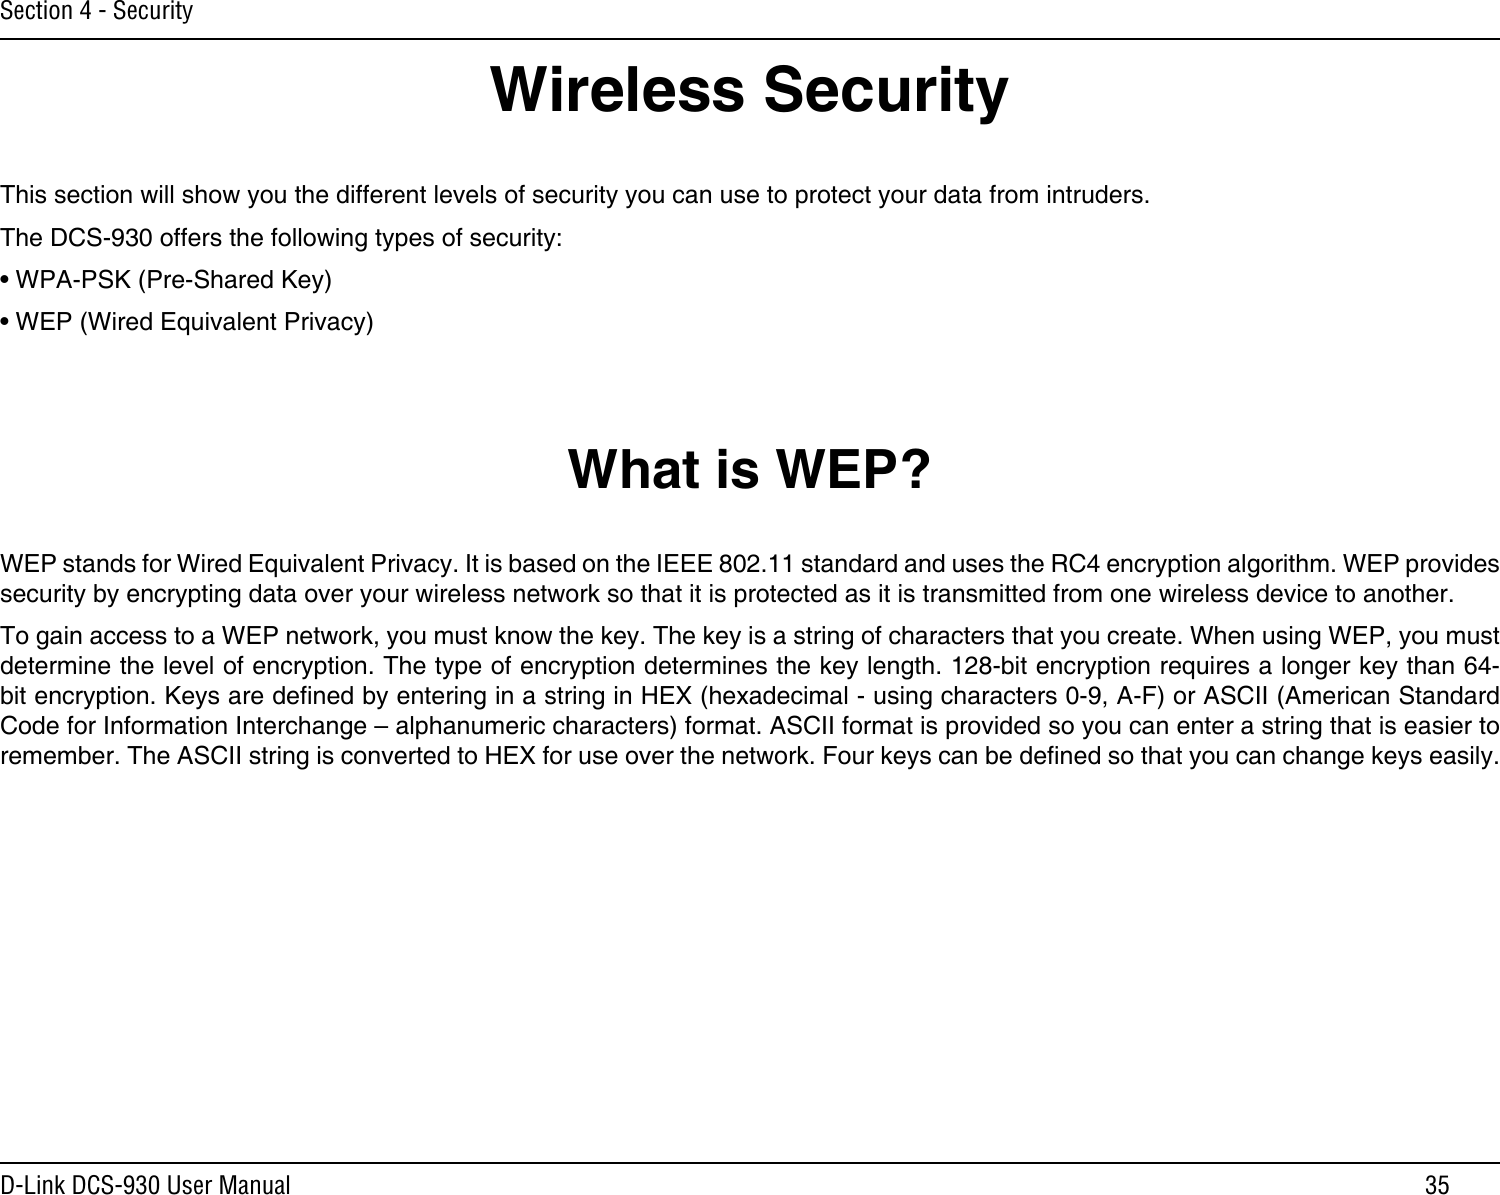 35D-Link DCS-930 User ManualSection 4 - SecurityWireless SecurityThis section will show you the different levels of security you can use to protect your data from intruders. The DCS-930 offers the following types of security:• WPA-PSK (Pre-Shared Key)• WEP (Wired Equivalent Privacy)What is WEP?WEP stands for Wired Equivalent Privacy. It is based on the IEEE 802.11 standard and uses the RC4 encryption algorithm. WEP provides security by encrypting data over your wireless network so that it is protected as it is transmitted from one wireless device to another.To gain access to a WEP network, you must know the key. The key is a string of characters that you create. When using WEP, you must determine the level of encryption. The type of encryption determines the key length. 128-bit encryption requires a longer key than 64-bit encryption. Keys are dened by entering in a string in HEX (hexadecimal - using characters 0-9, A-F) or ASCII (American Standard Code for Information Interchange – alphanumeric characters) format. ASCII format is provided so you can enter a string that is easier to remember. The ASCII string is converted to HEX for use over the network. Four keys can be dened so that you can change keys easily.